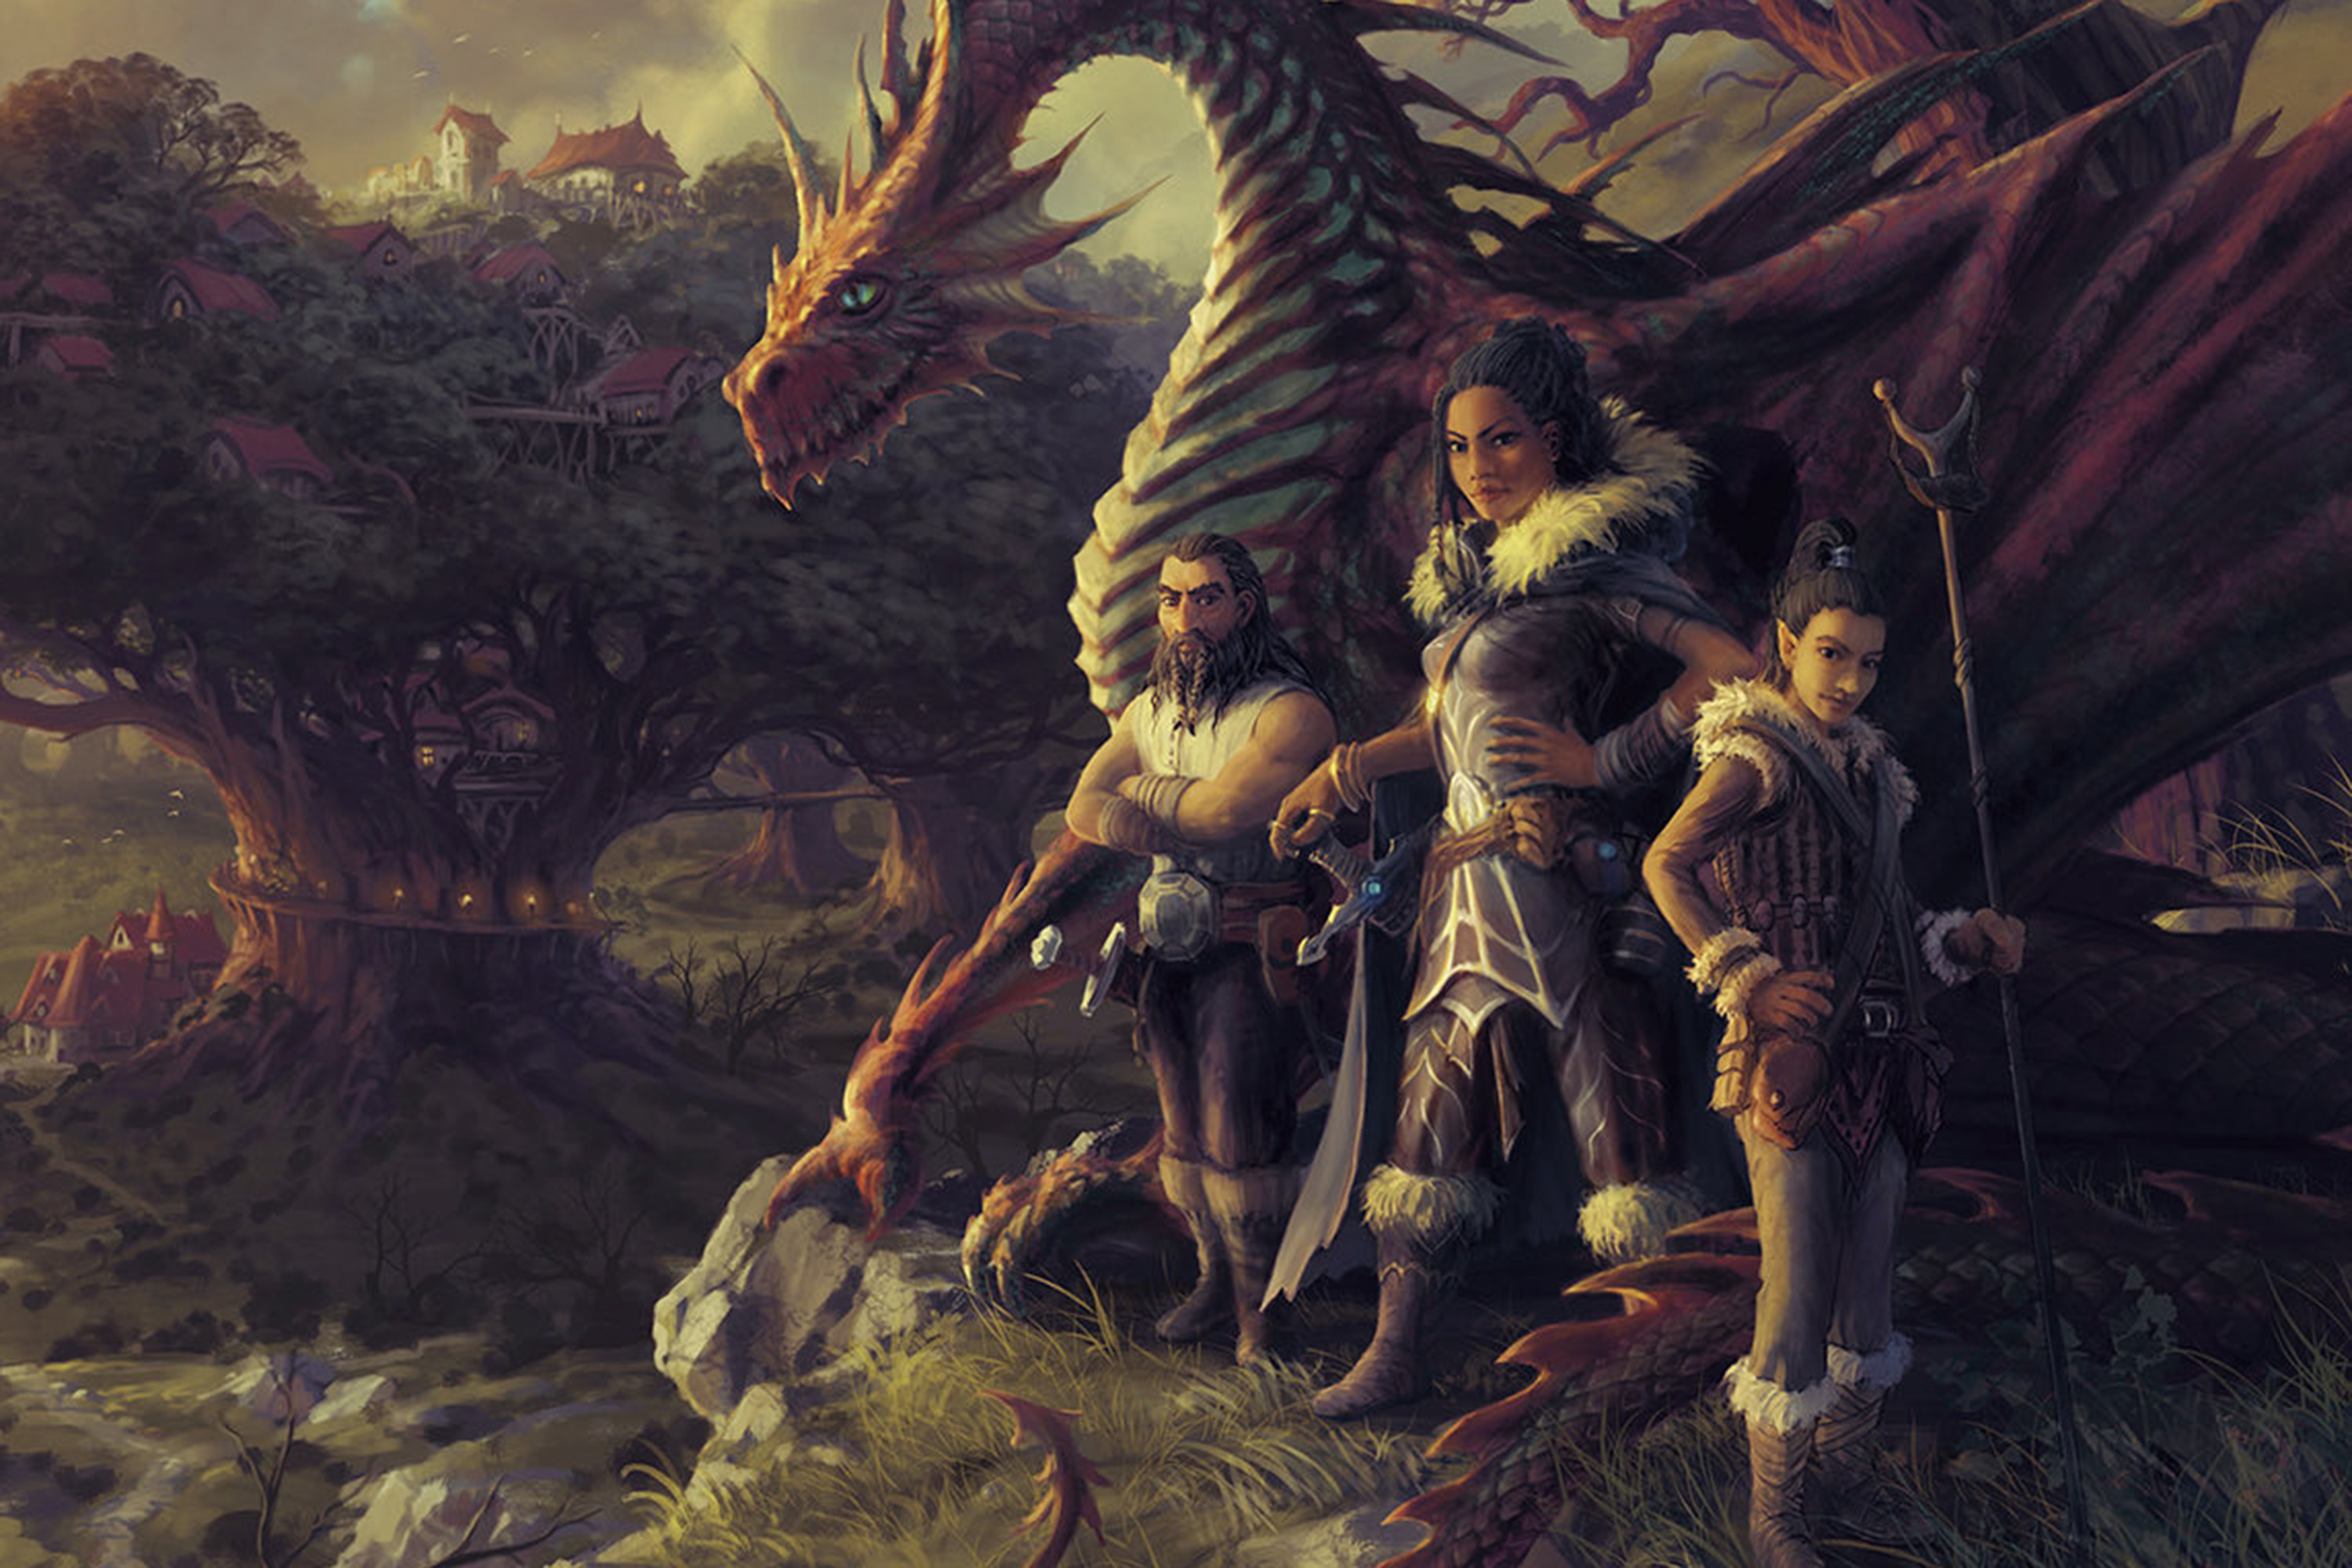 Three characters stand in front of a proud, red dragon.